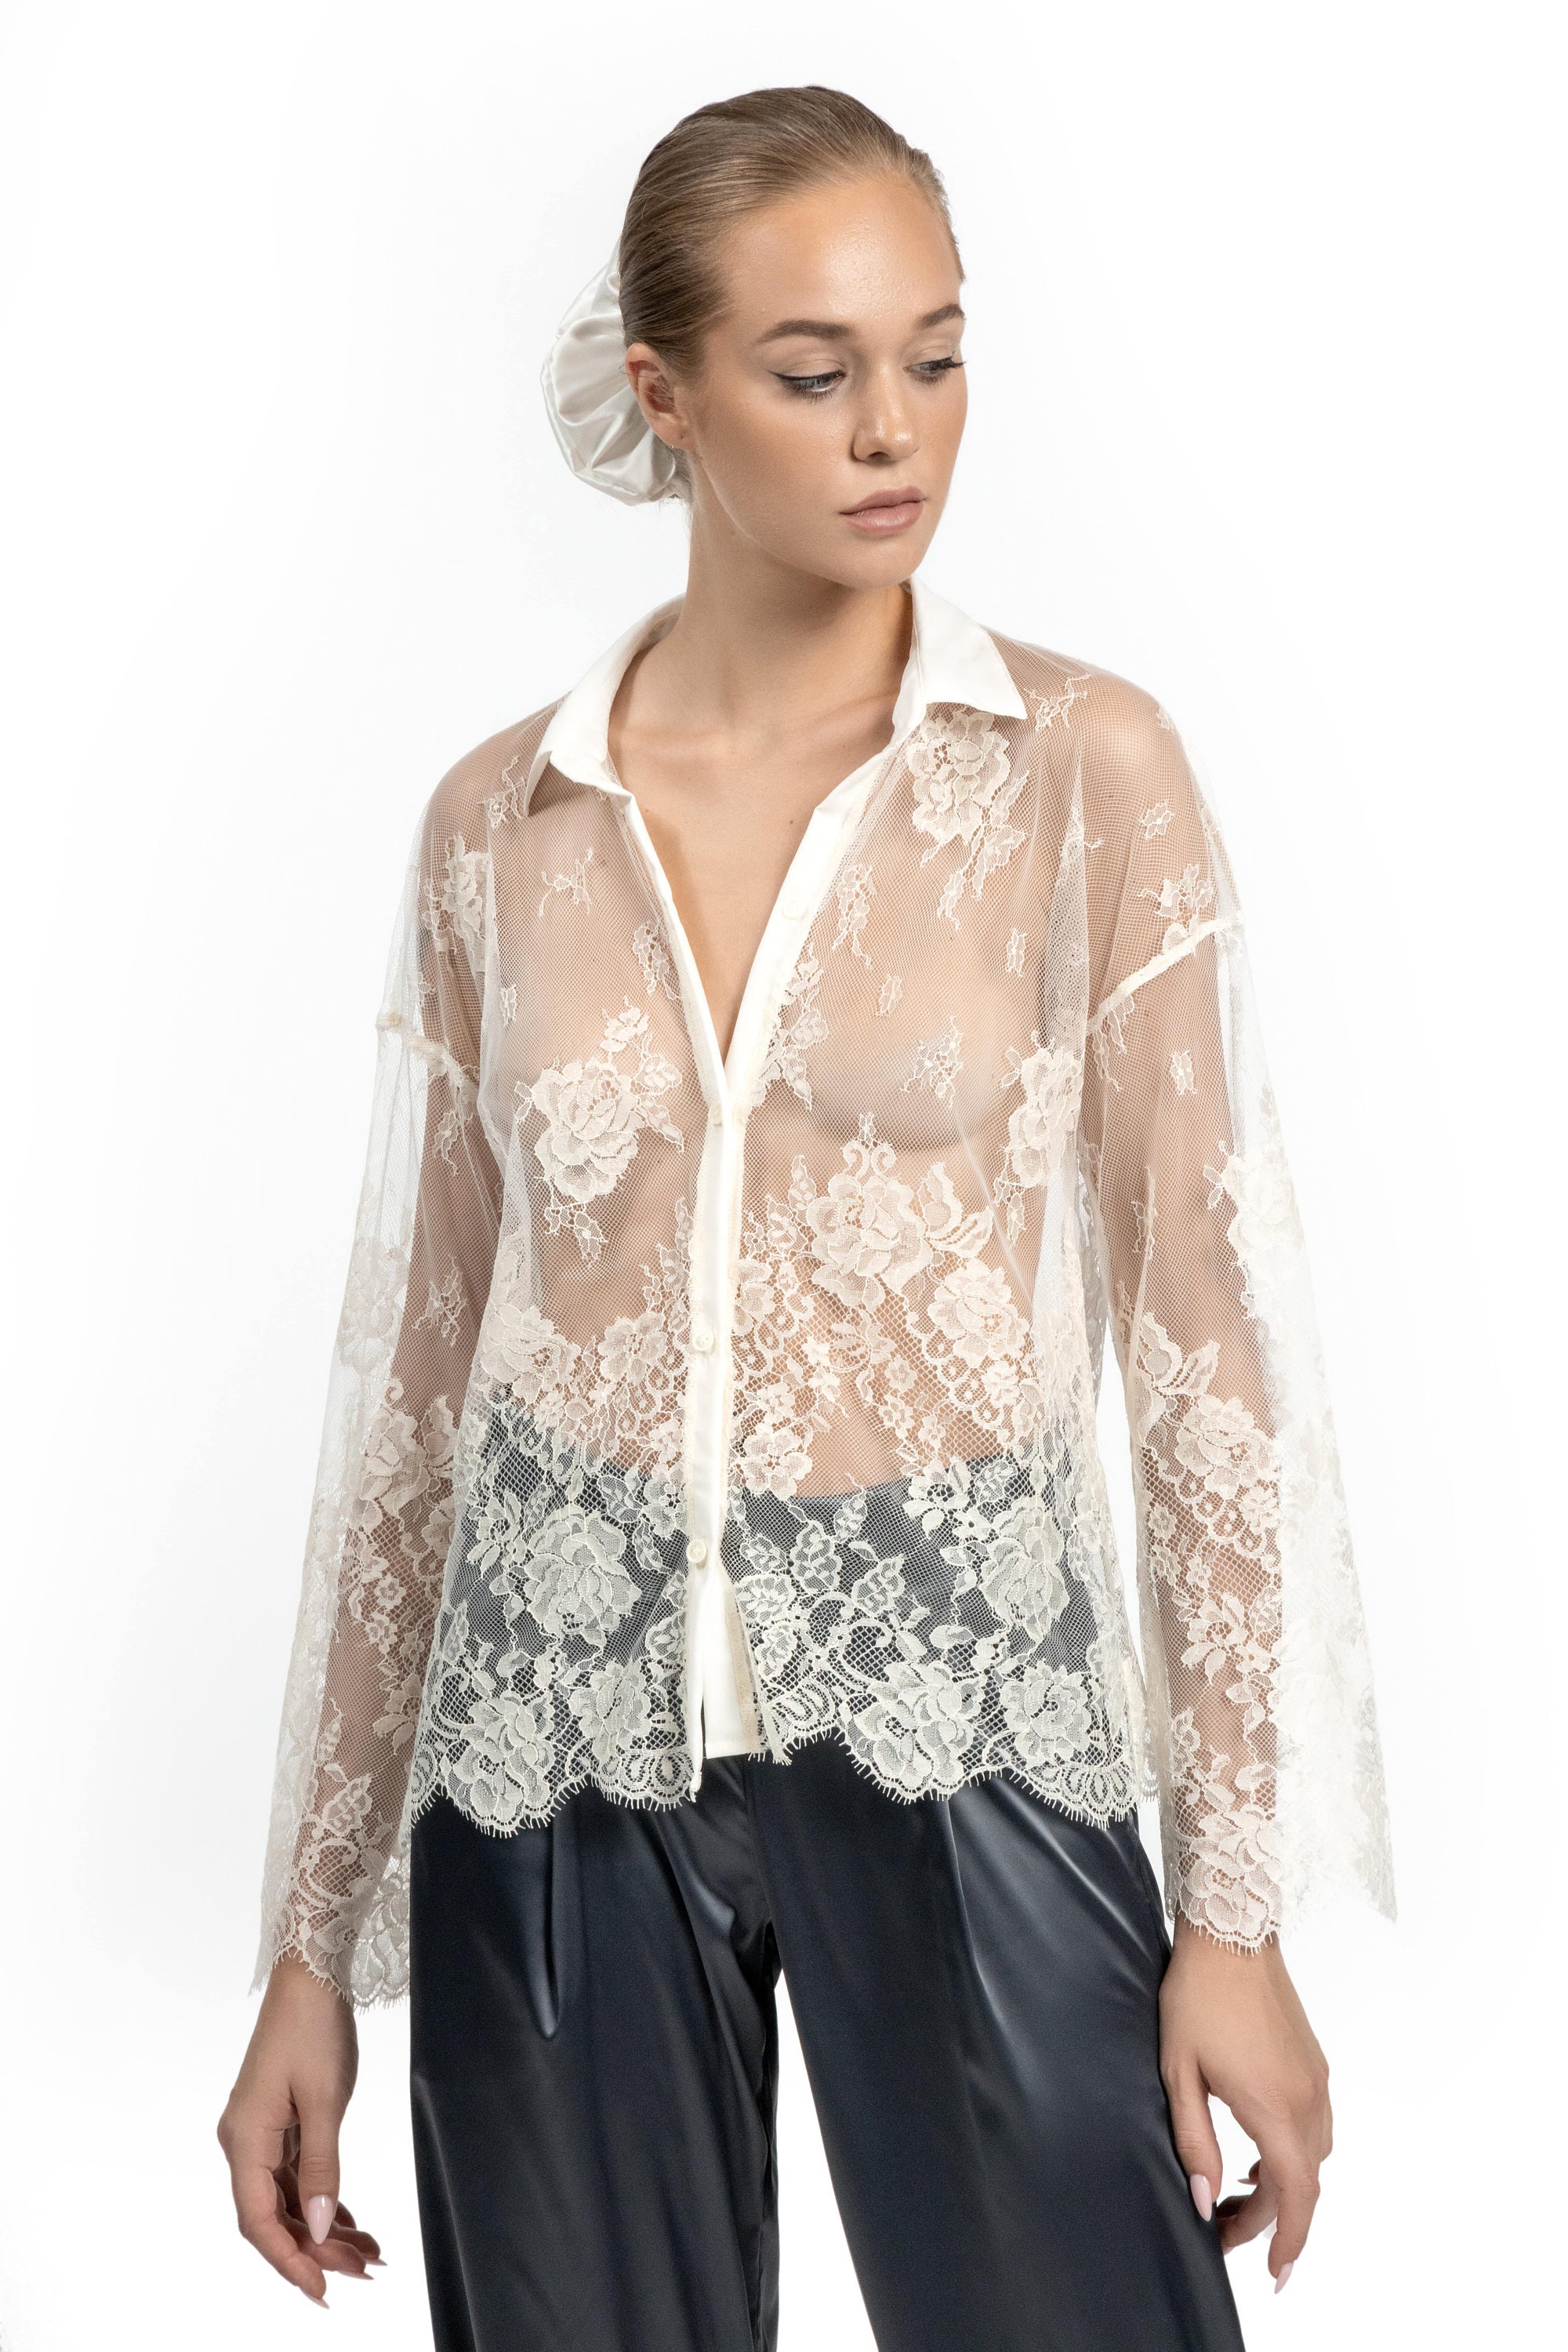 christina ackerman recommends see thru blouse pictures pic